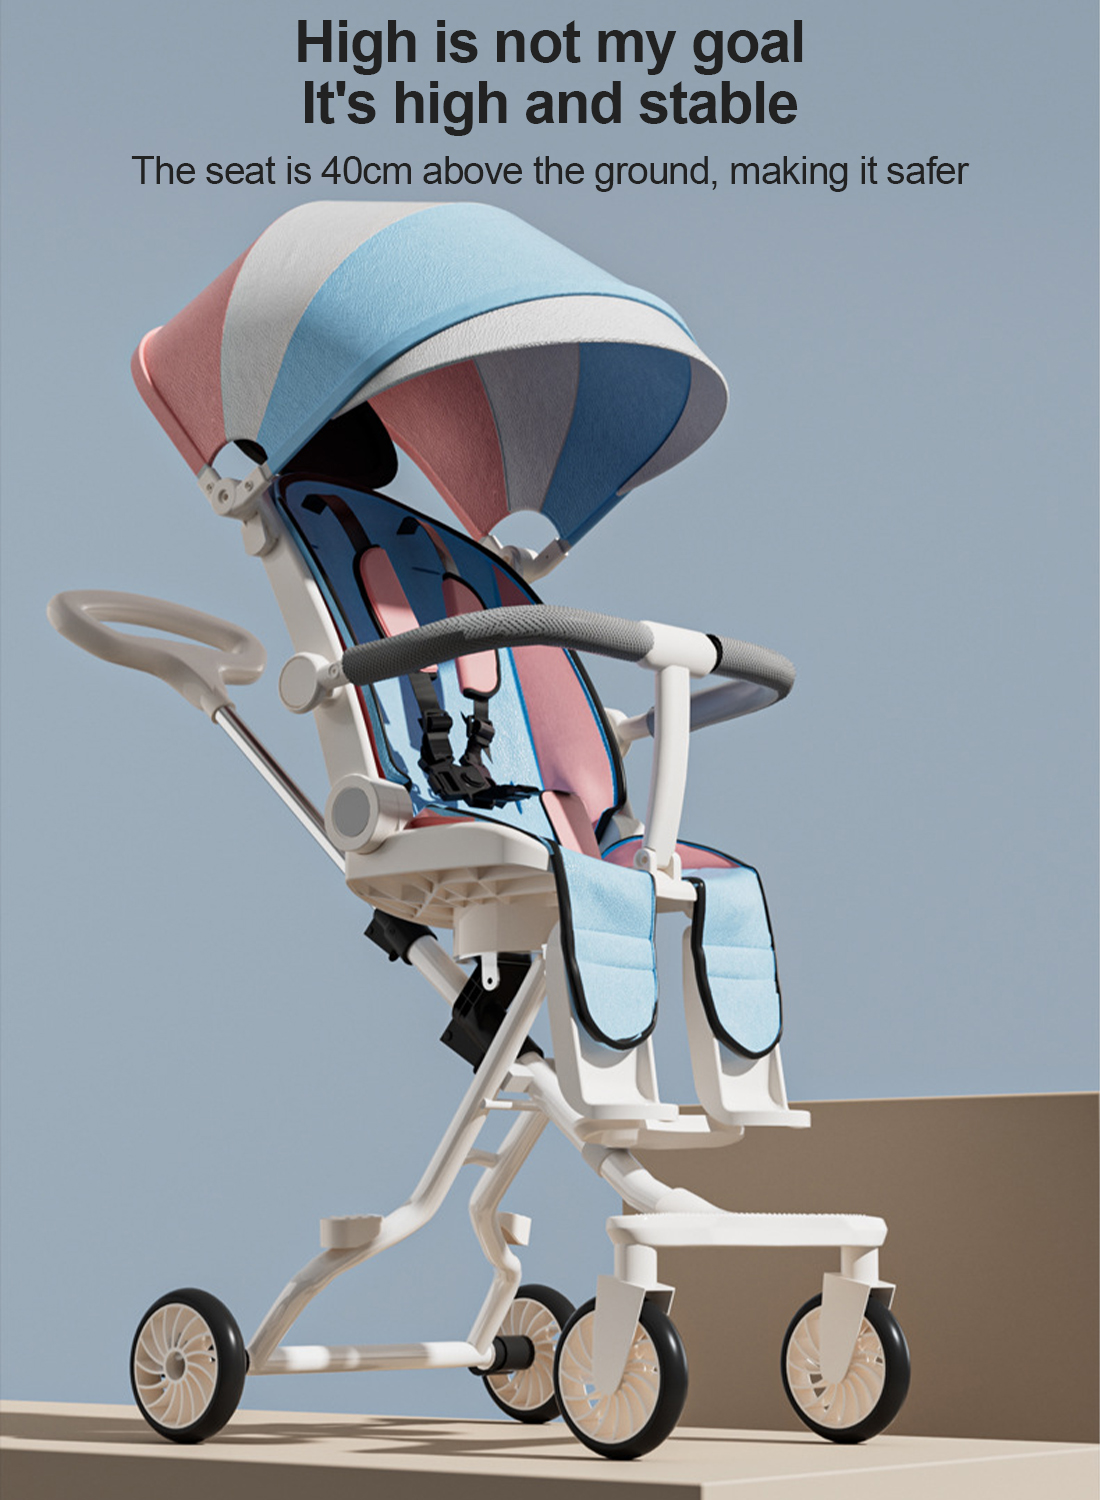 Portable Folding Stroller for Infants and Young Children